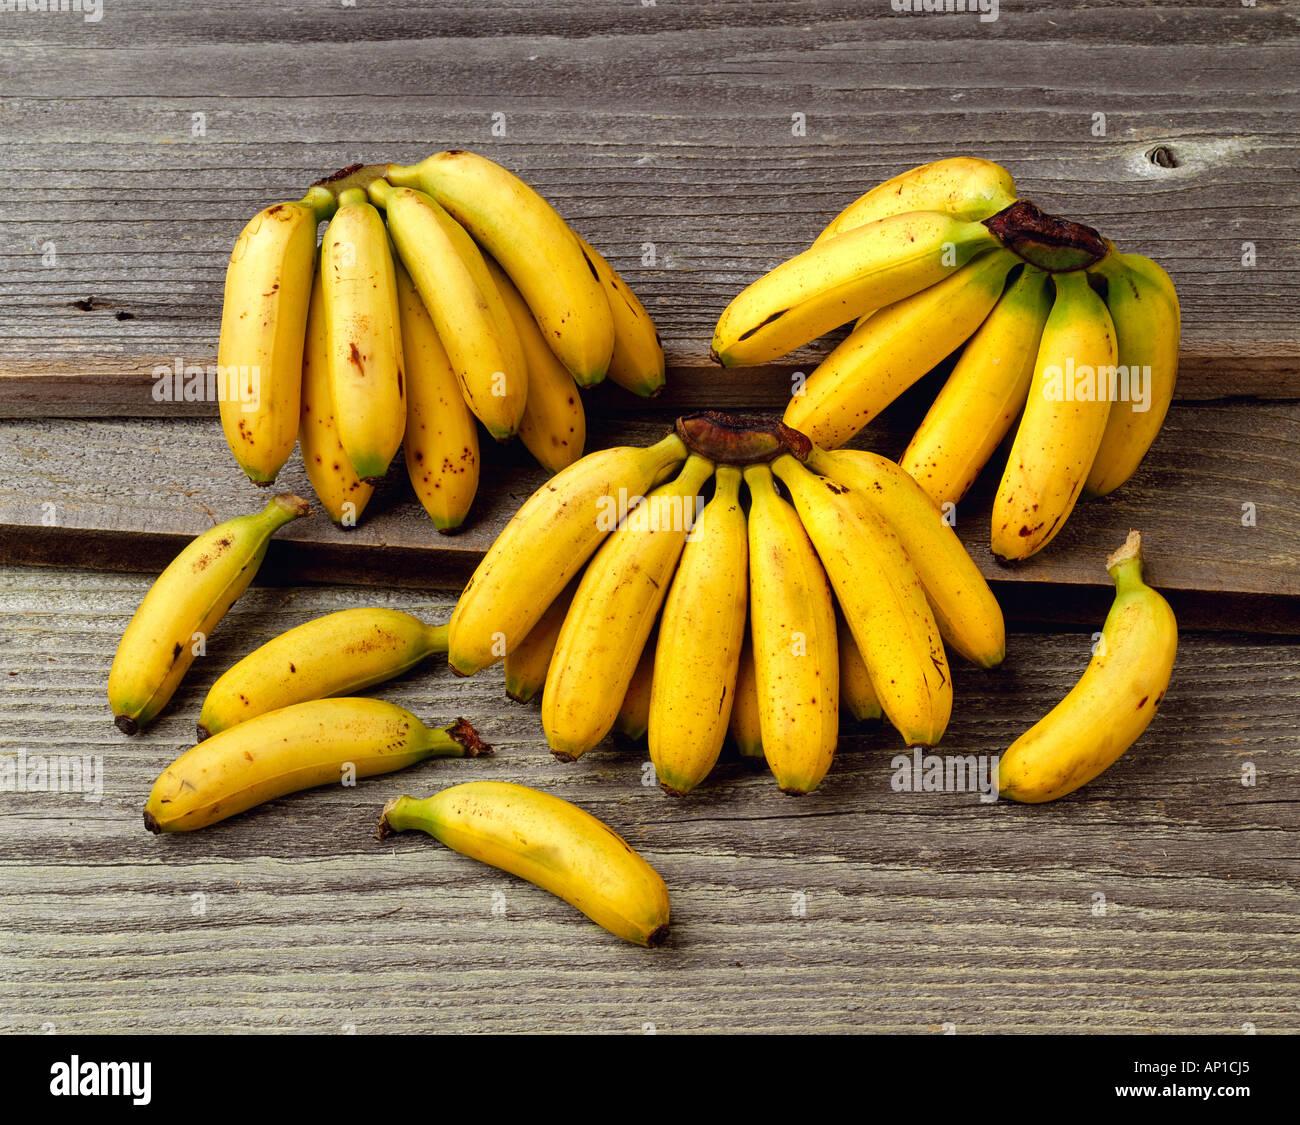 Agriculture - Baby bananas on a barnwood surface, in studio. Stock Photo